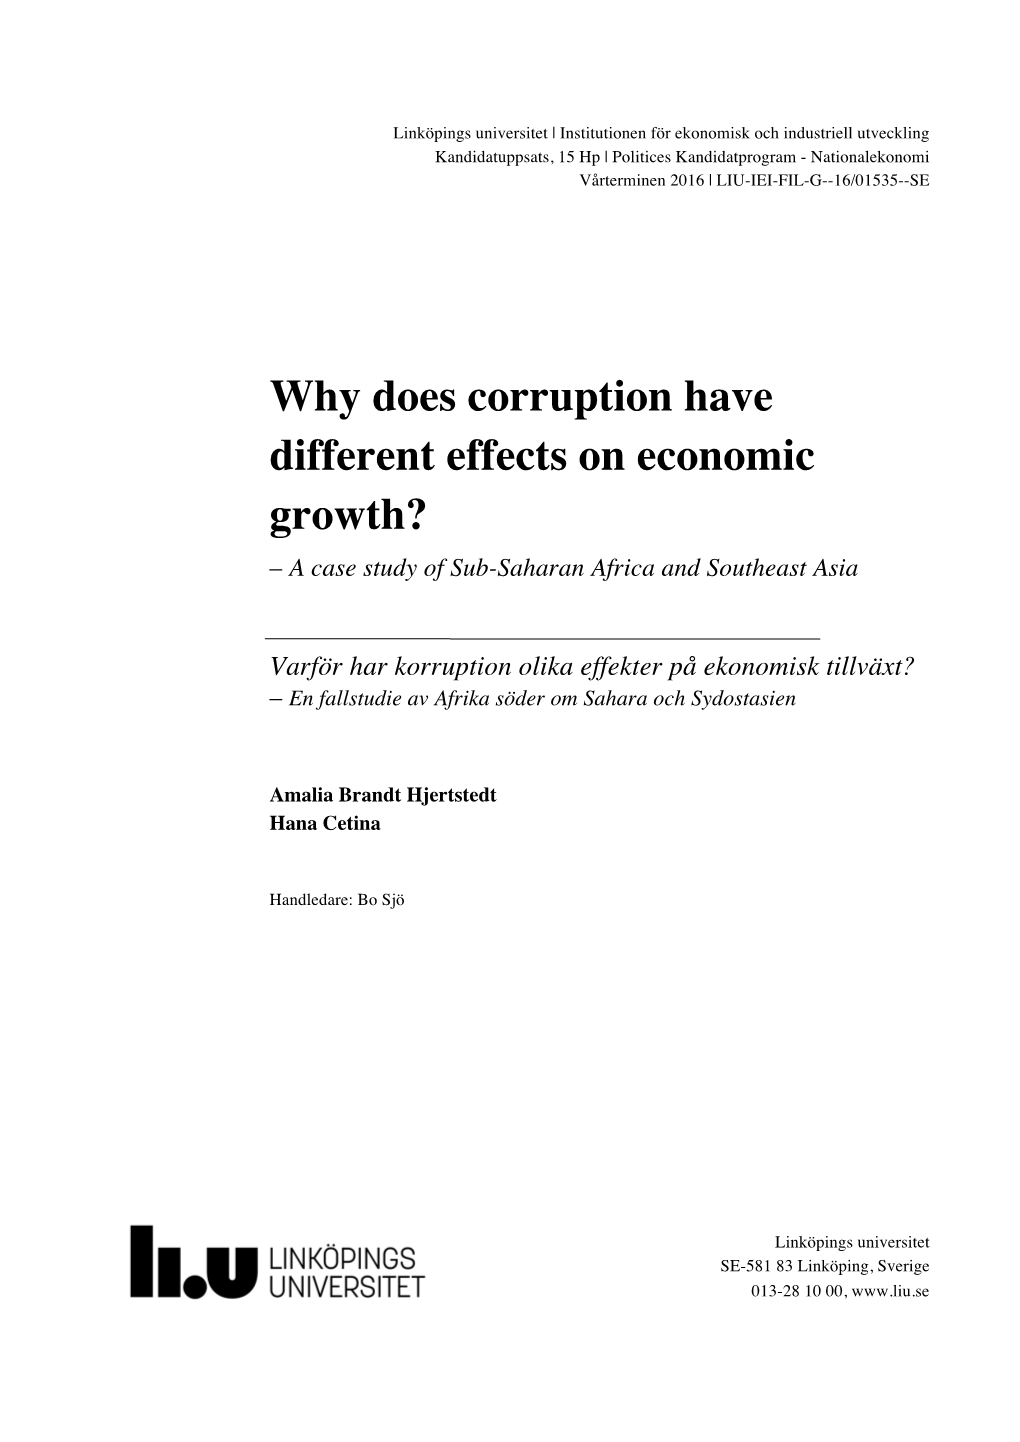 Why Does Corruption Have Different Effects on Economic Growth? – a Case Study of Sub-Saharan Africa and Southeast Asia